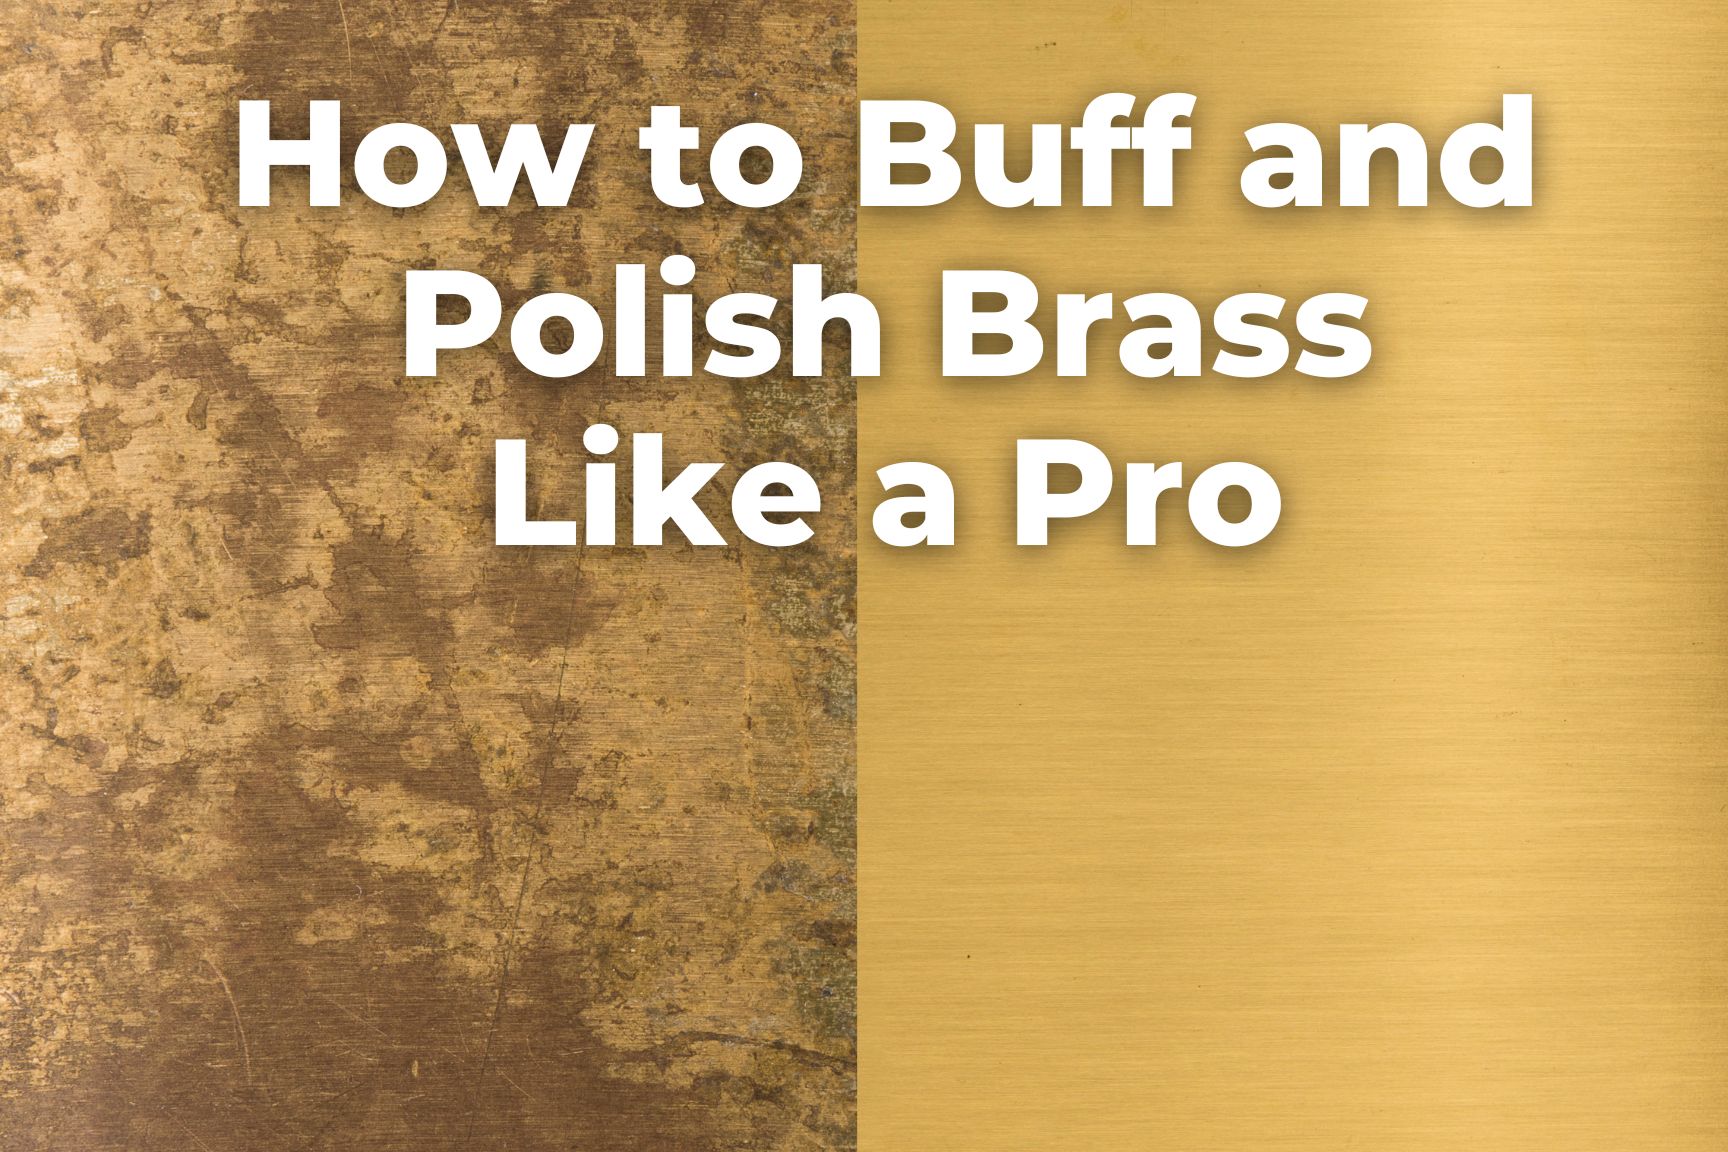 How to buff and polish brass like a pro - clean tarnish and get a mirror reflection finish